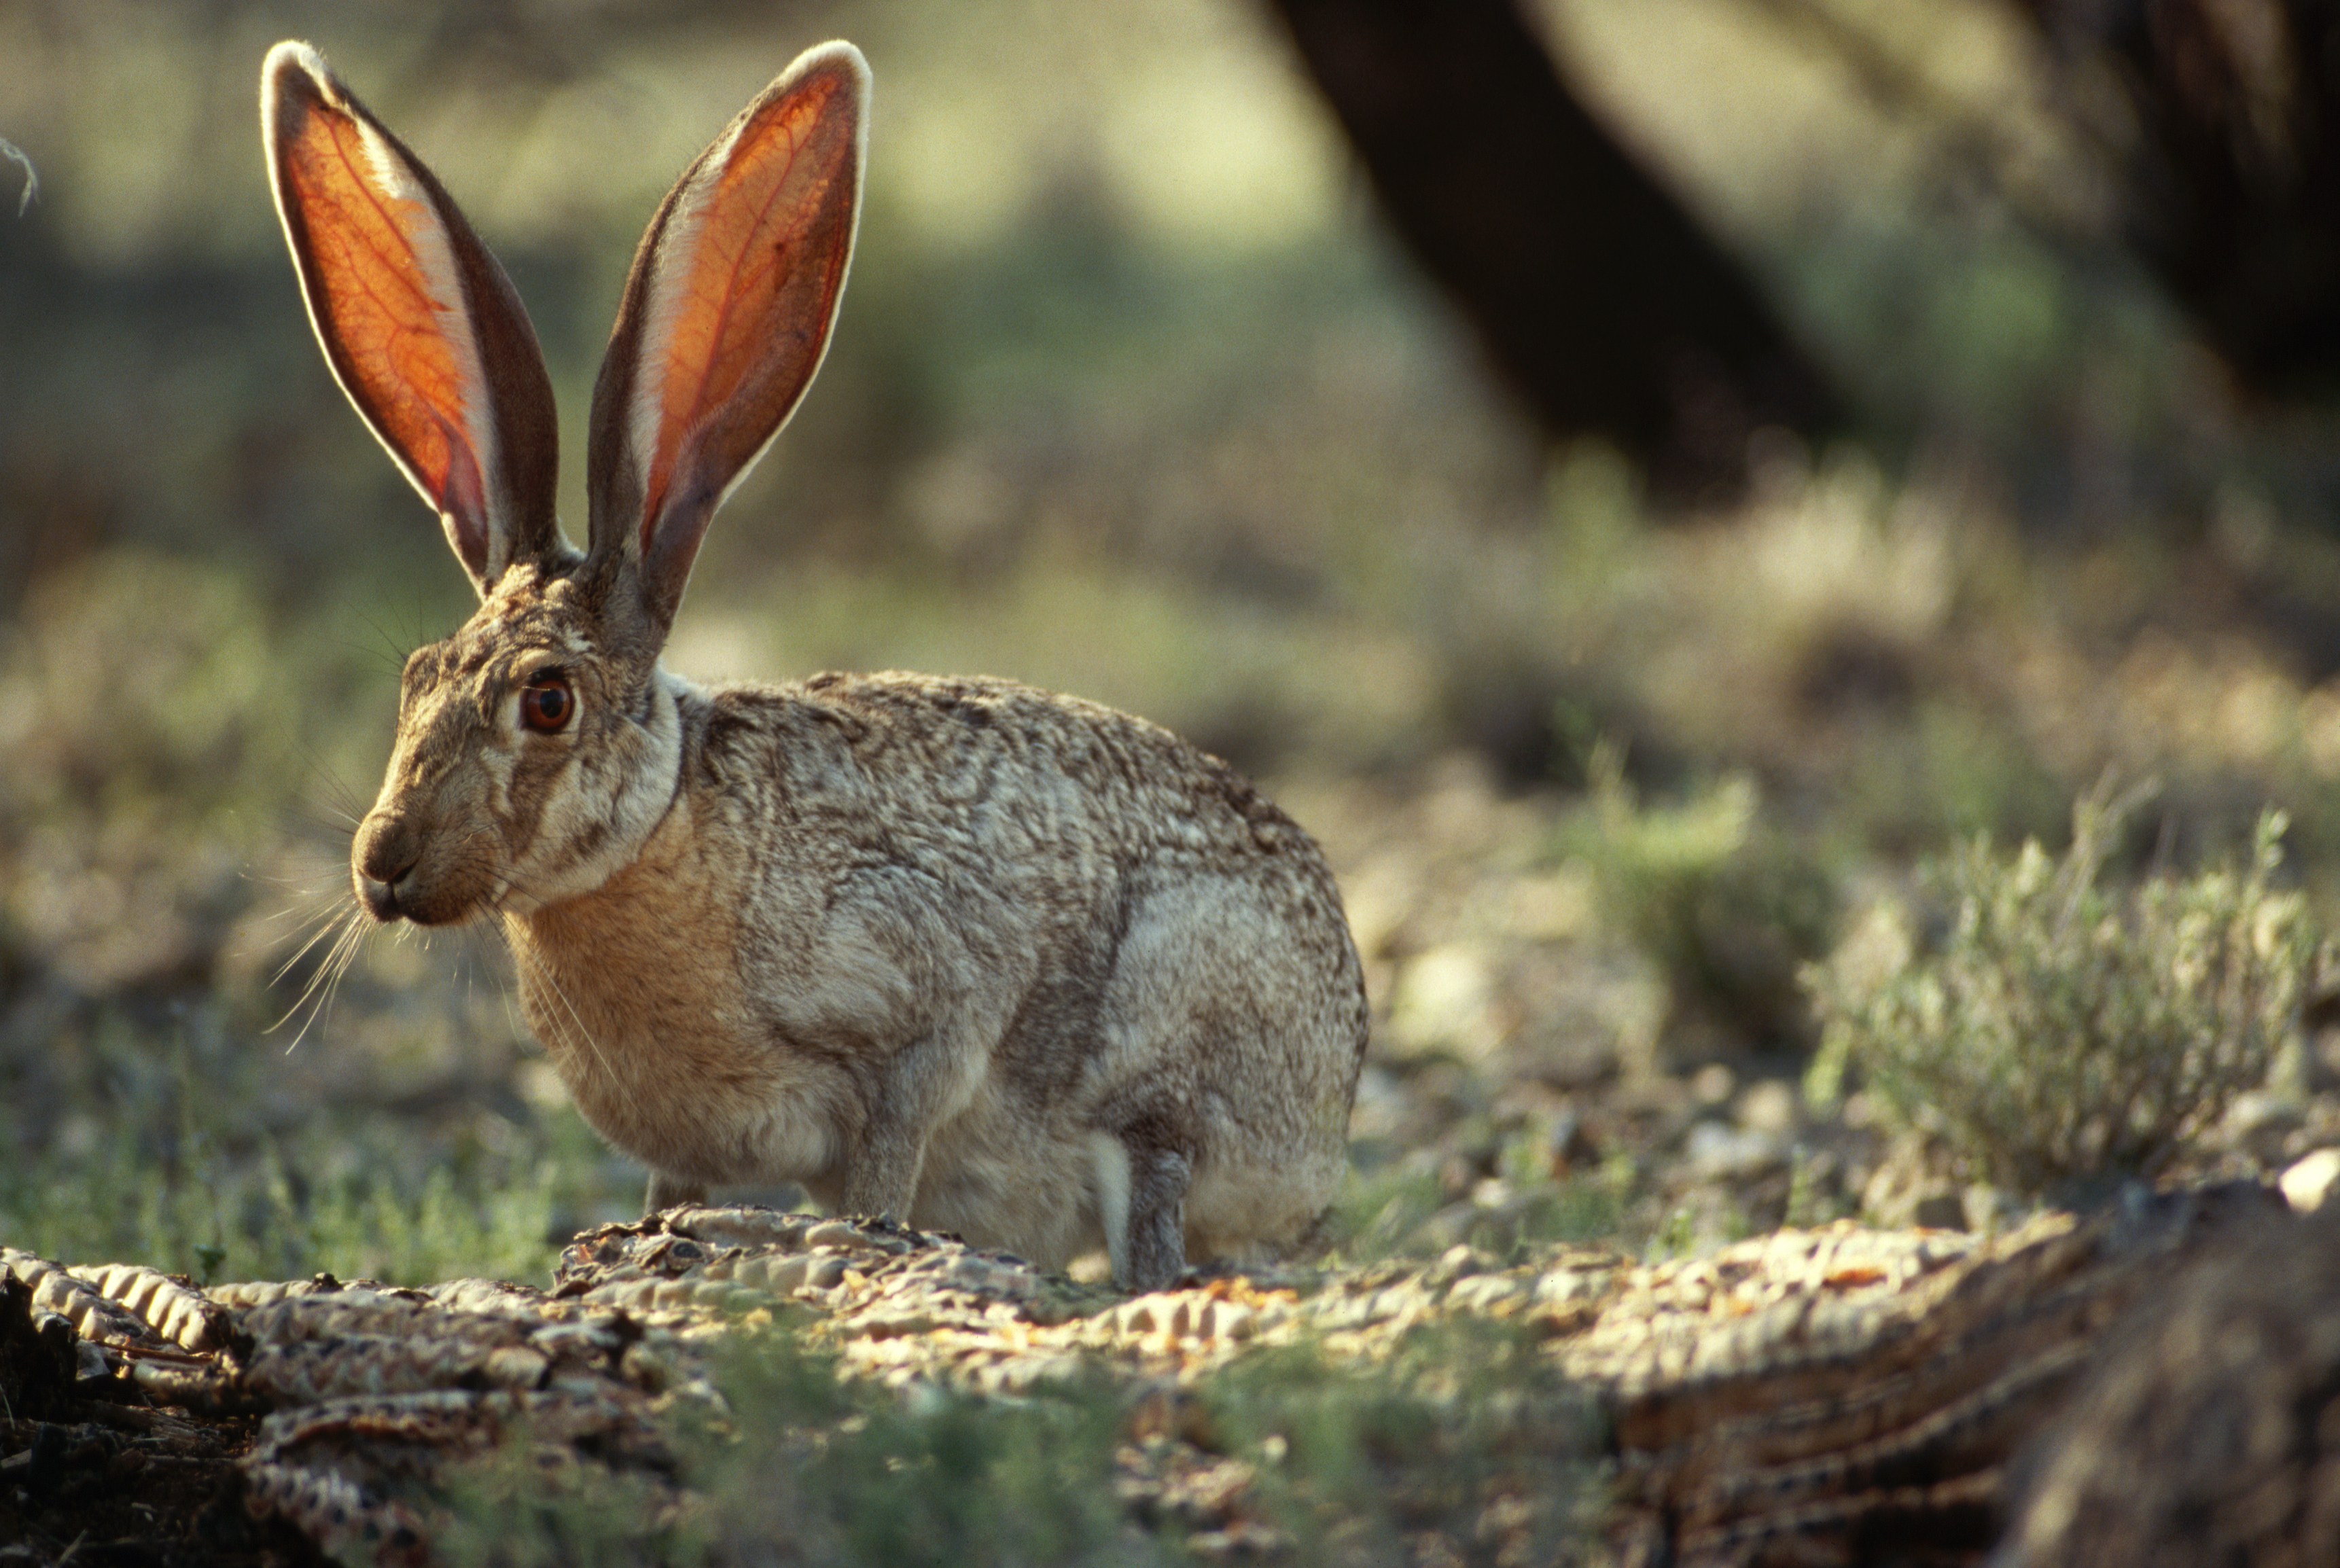 Lethal and highly contagious disease that strikes rabbits is detected in Palm Springs